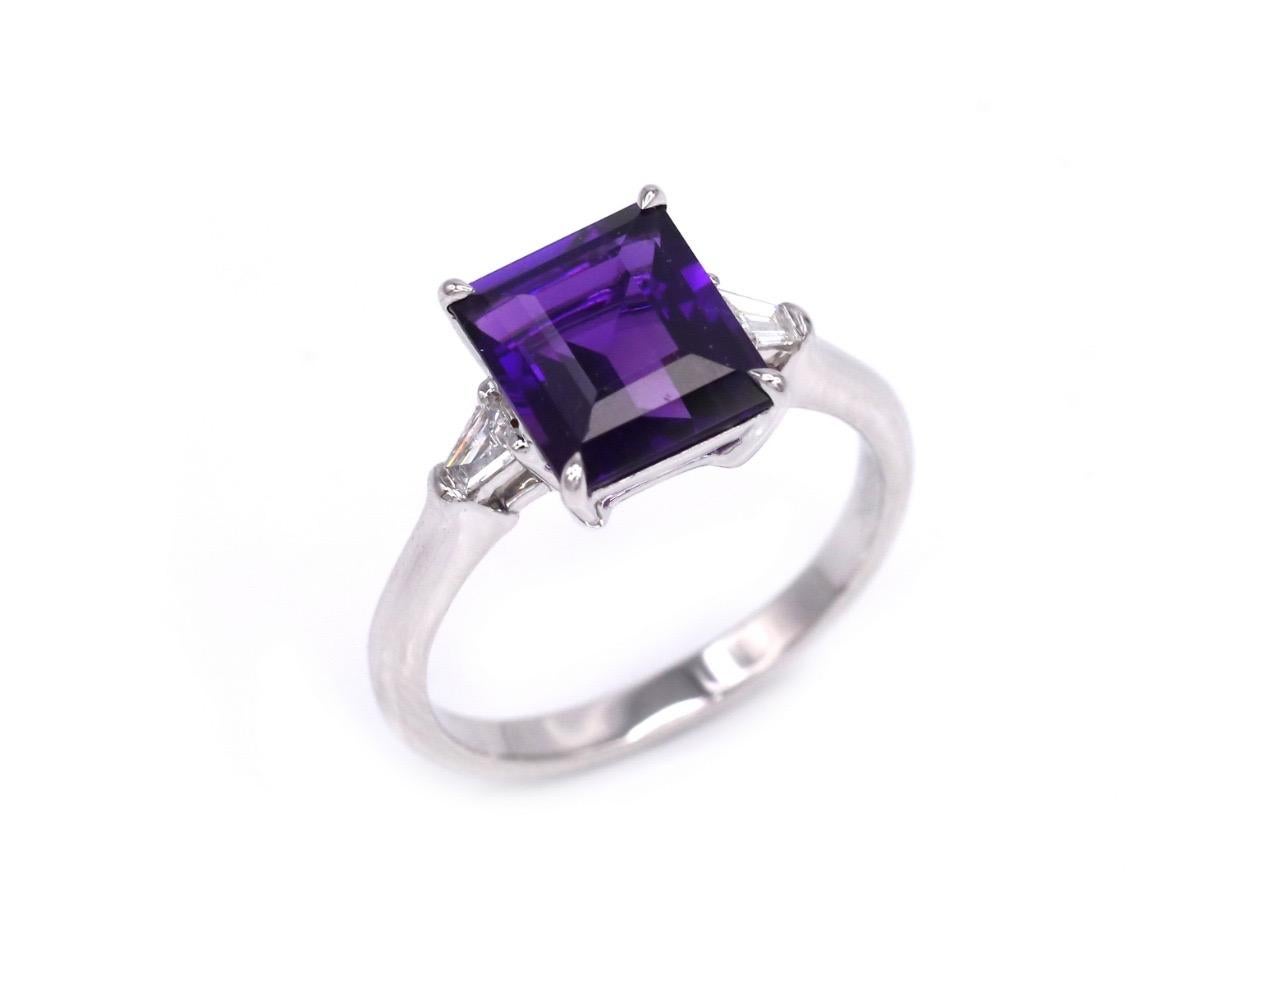 This classy elegant 18 Karat White Gold ring features a flawless purple square shaped amethyst and two diamonds. The dramatically deep purple hues of Amethyst are known to have inspired civilizations around the world for thousands of years. Amethyst